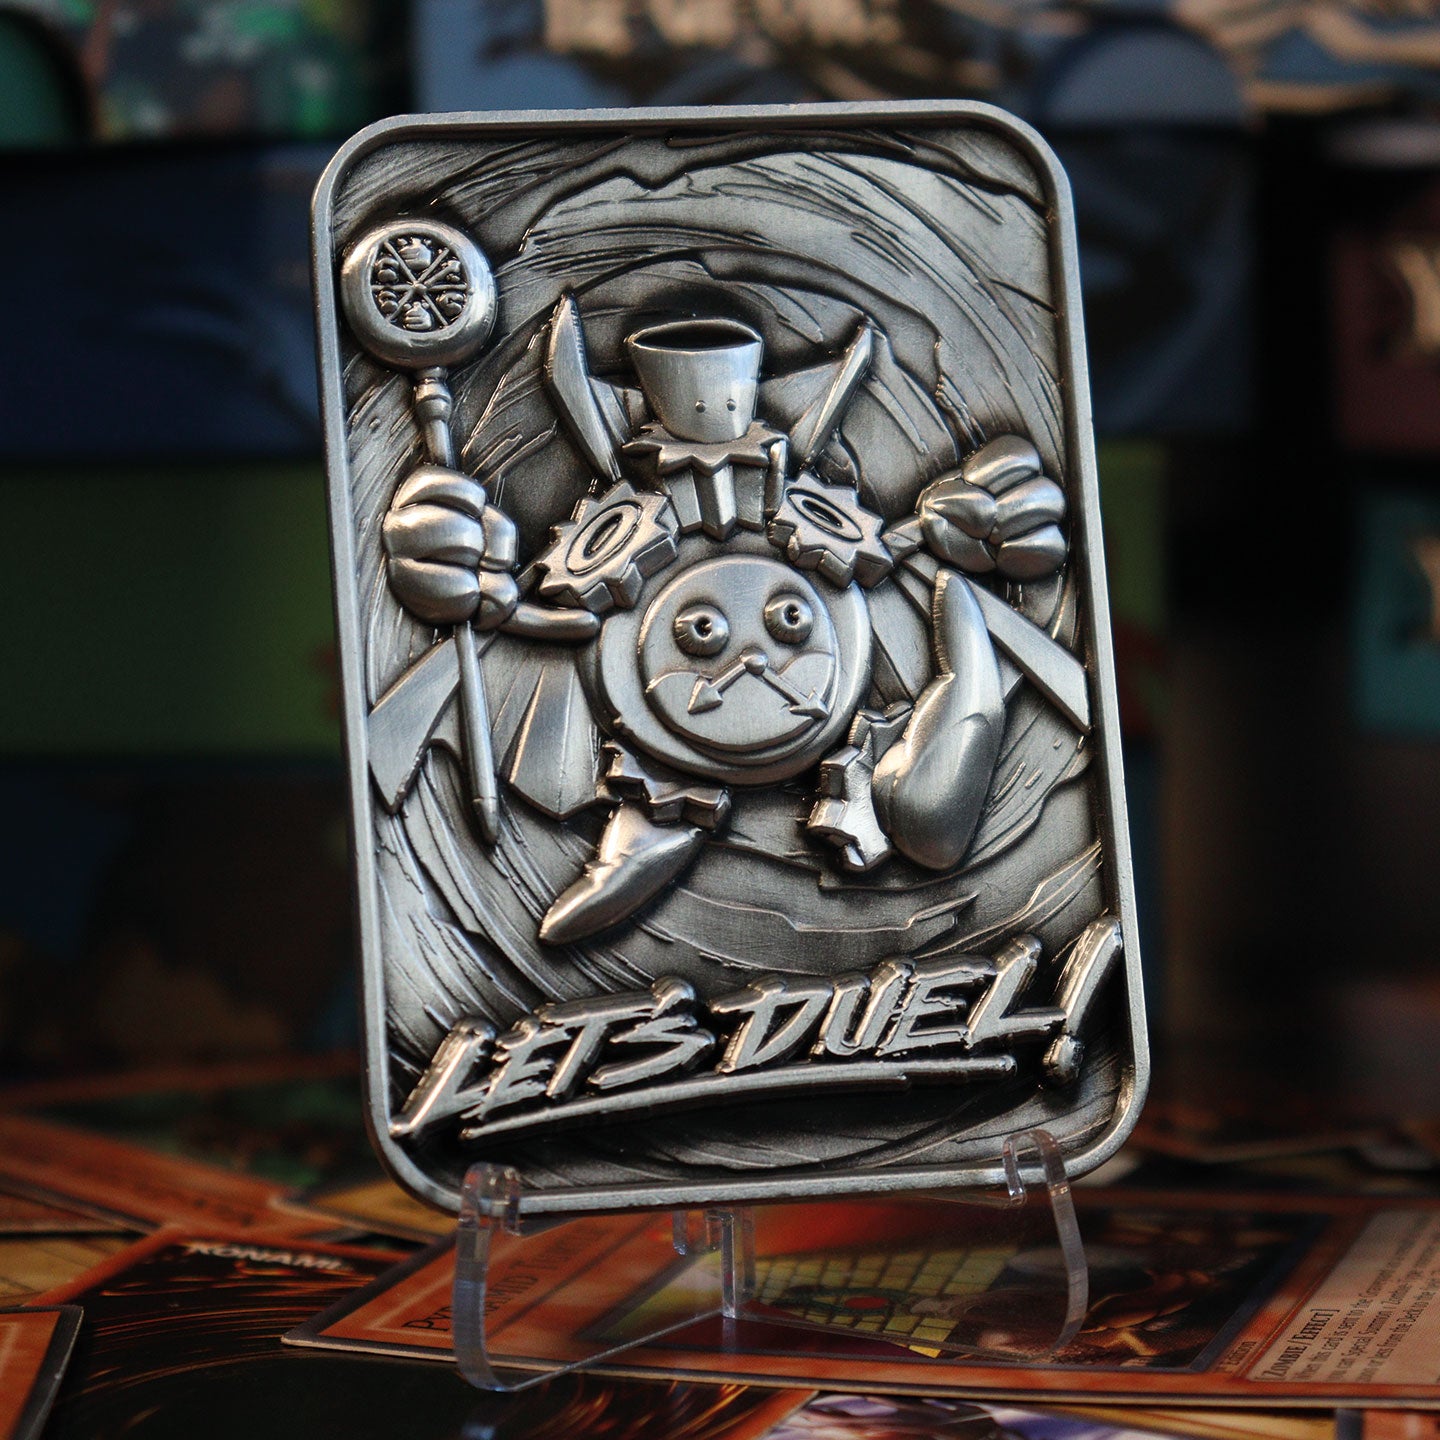 Yu-Gi-Oh! Limited Edition Time Wizard Metal Card